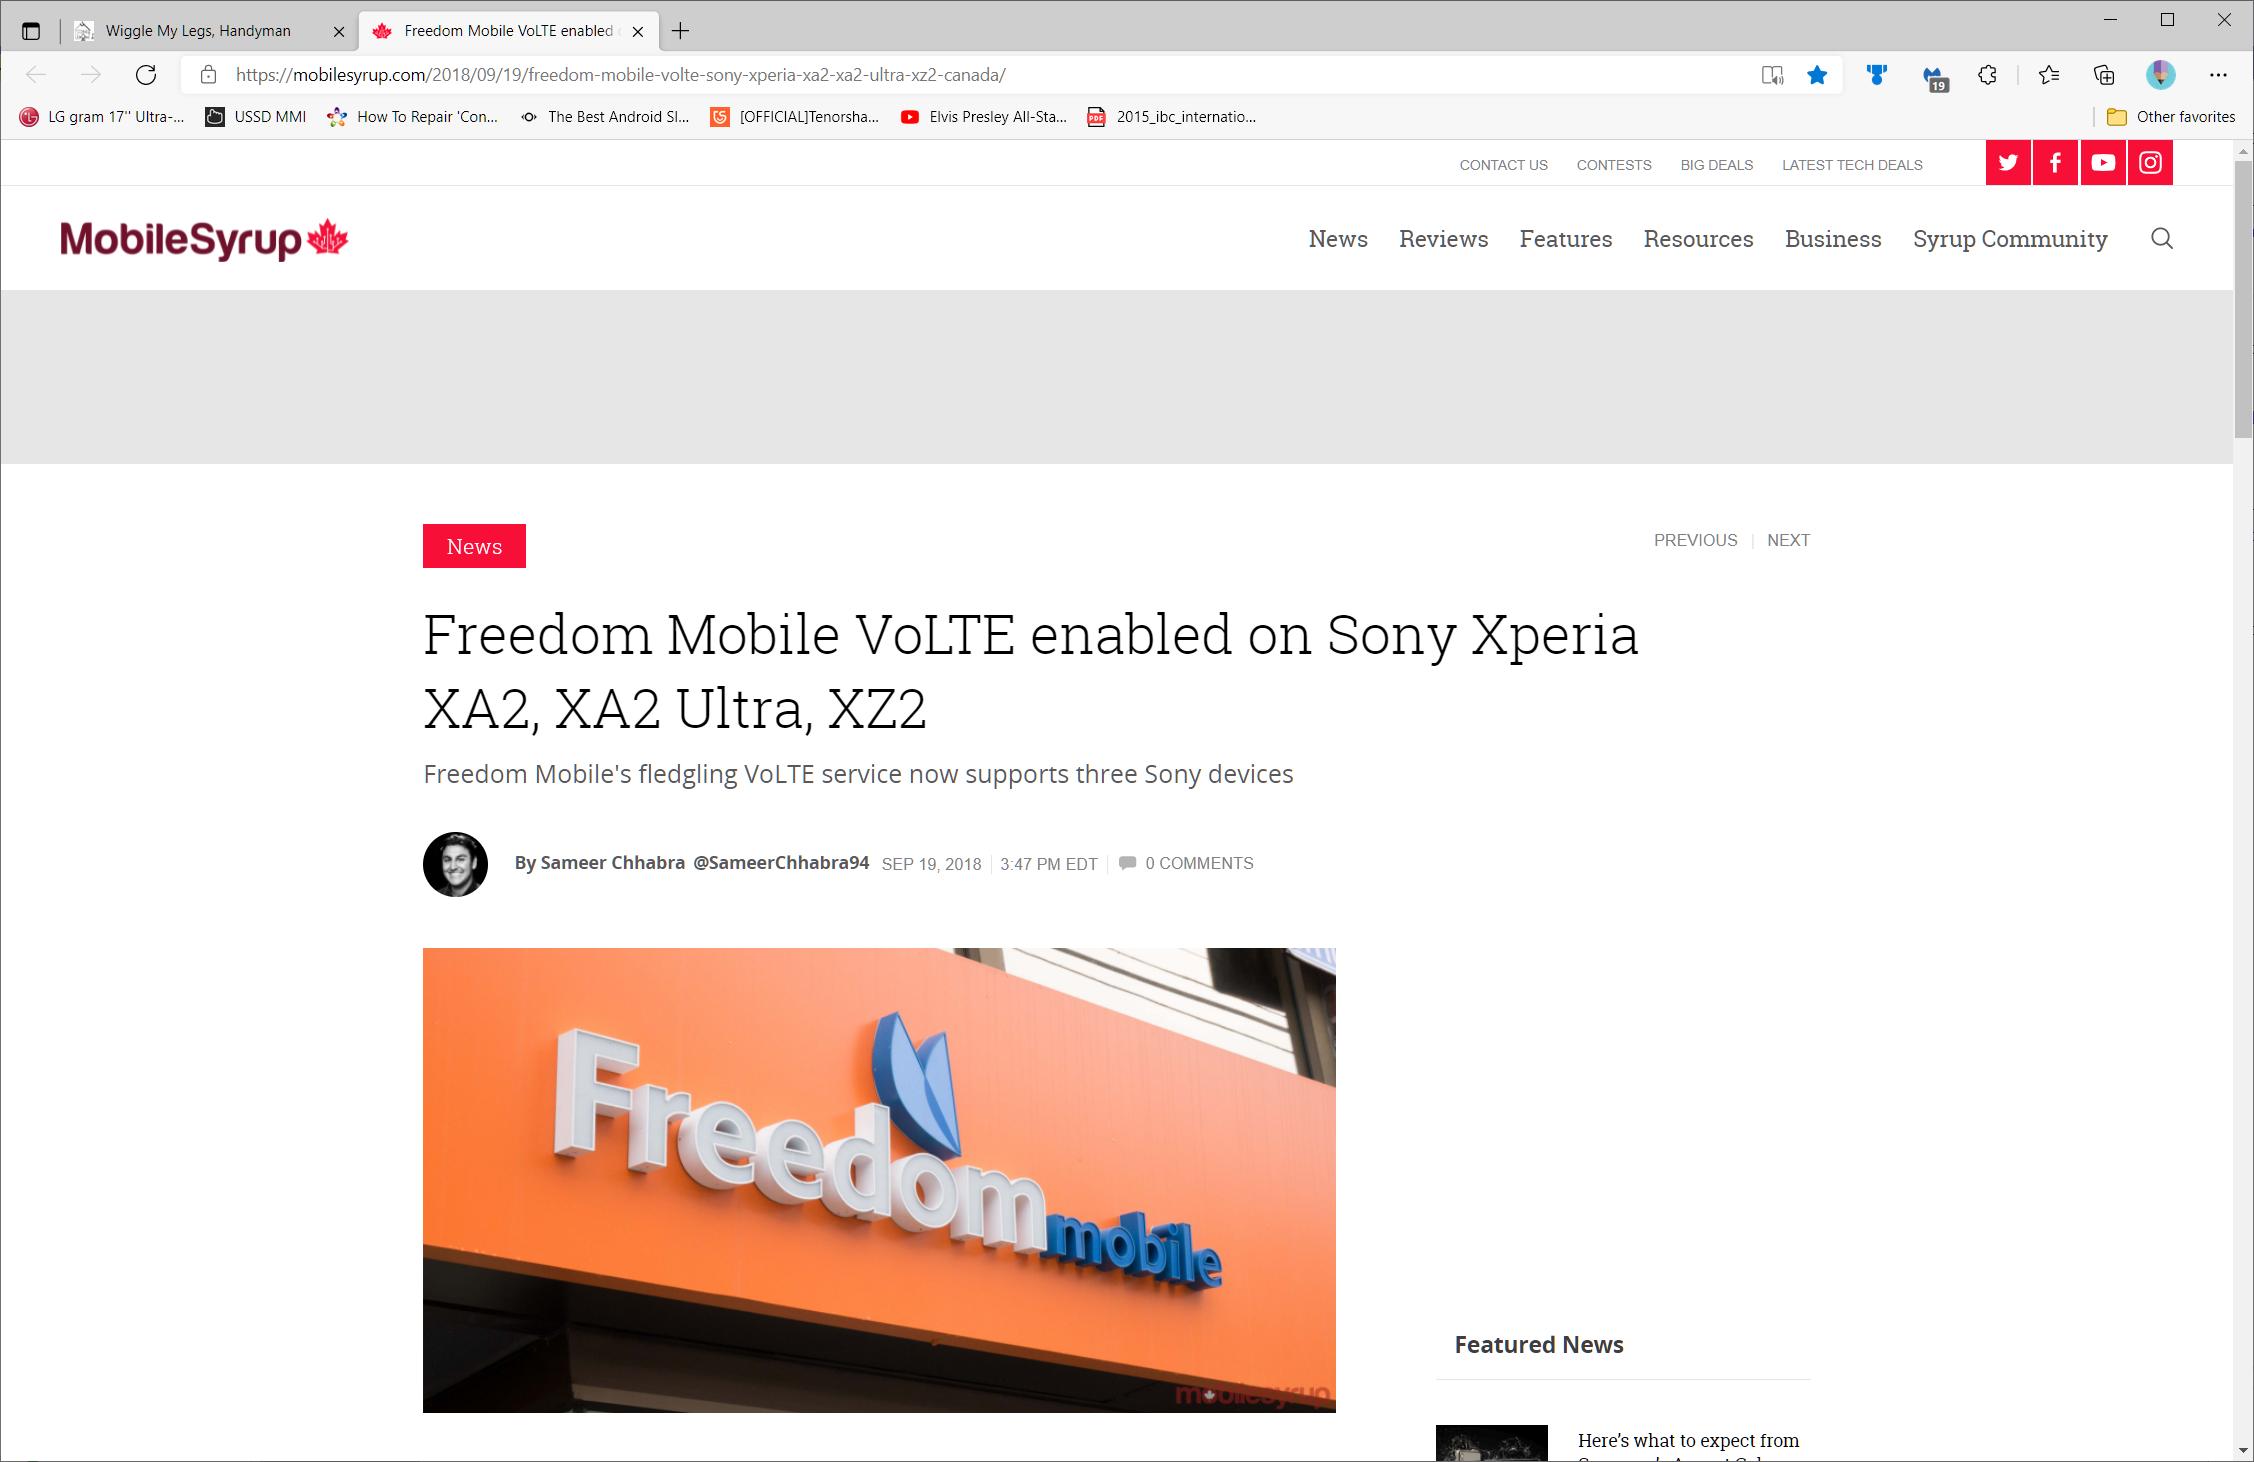 News article about Freedom Mobile adding Sony XA2 VoLTE support.